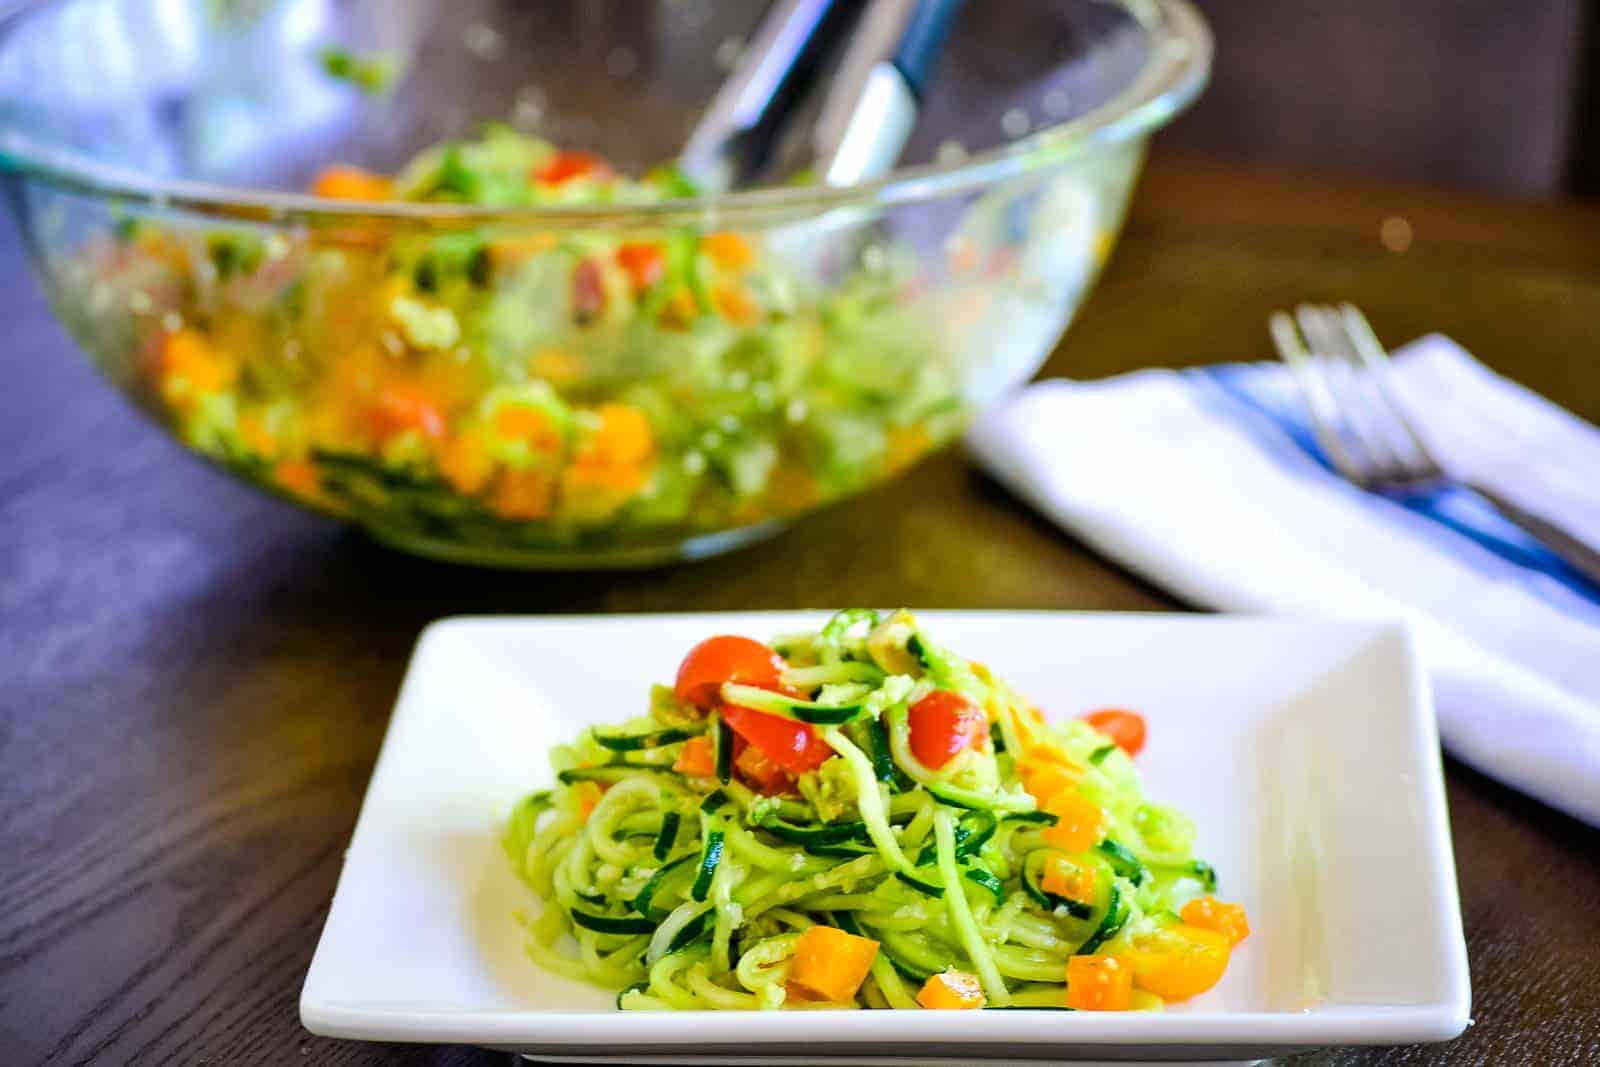 Zucchini noodle salad on a white square plate with a serving bowl in the background.